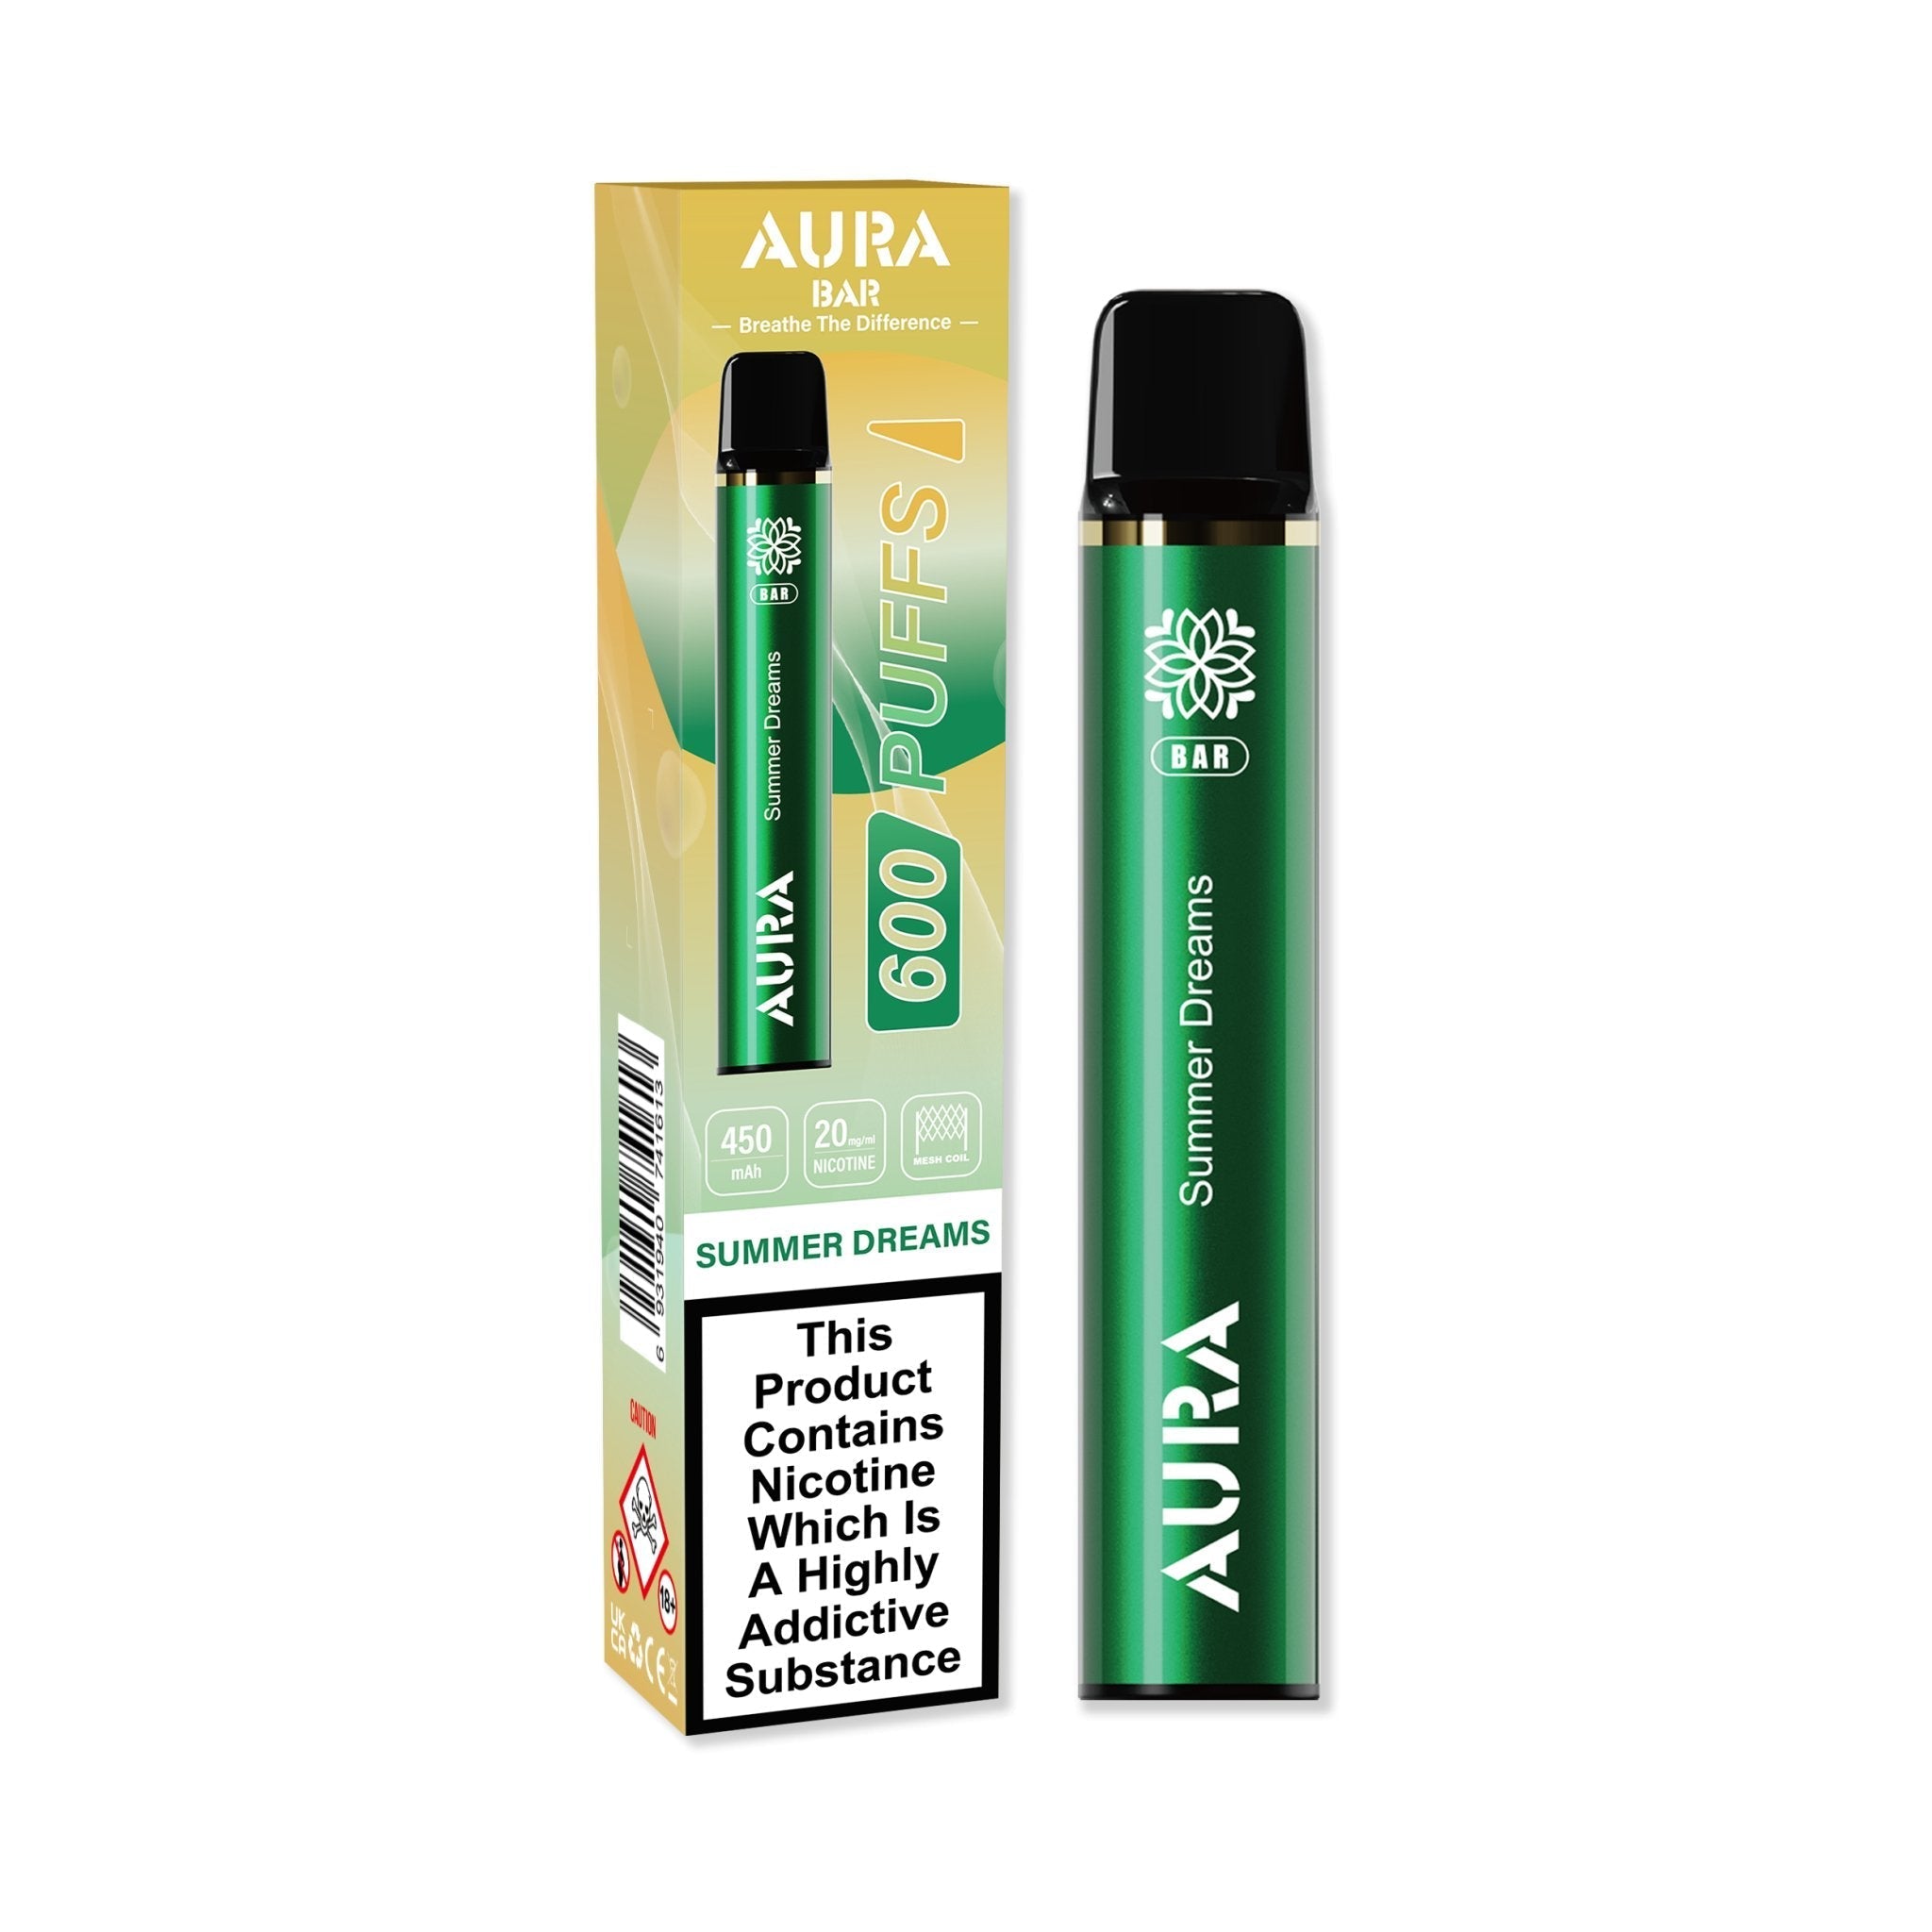 Aura Bar 600 Puffs Disposable Vape By Crystal Prime - Wolfvapes.co.uk-Summer Dreams